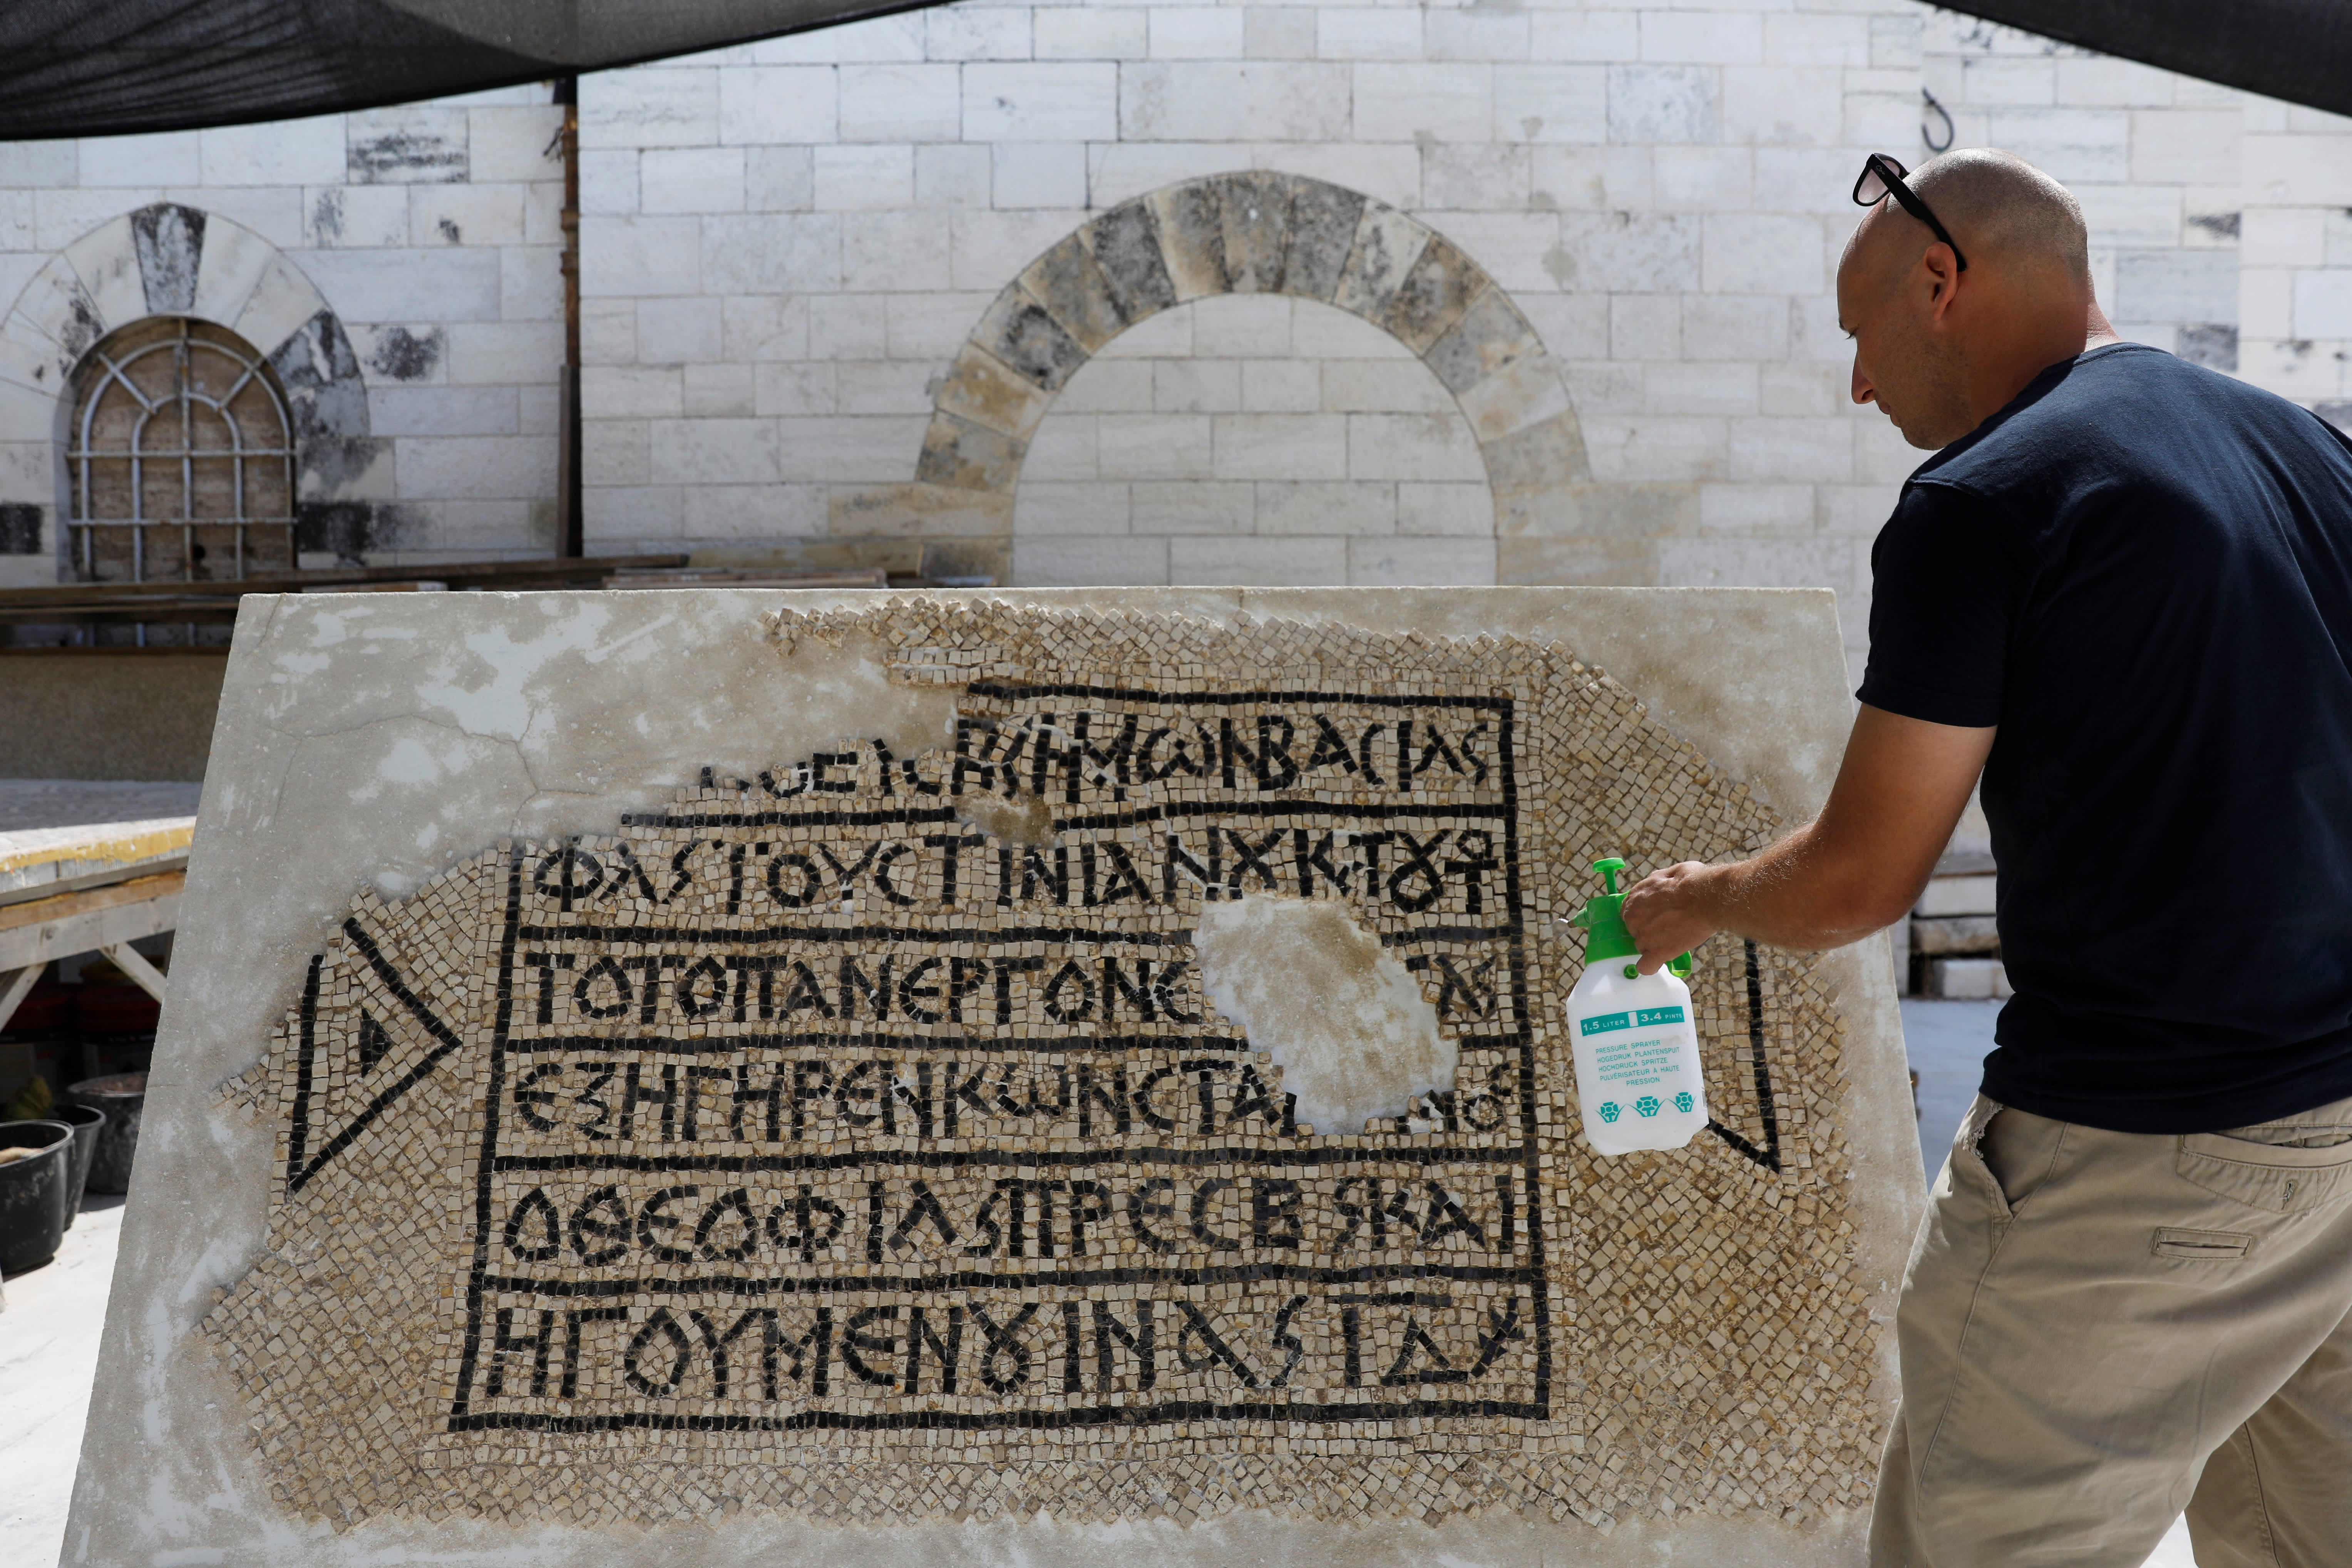 A conservationist works on a 1500-year-old mosaic floor bearing a Greek writing, discovered near Damascus Gate in Jerusalem's Old City, August 23, 2017 (Reuters/Ronen Zvulun)